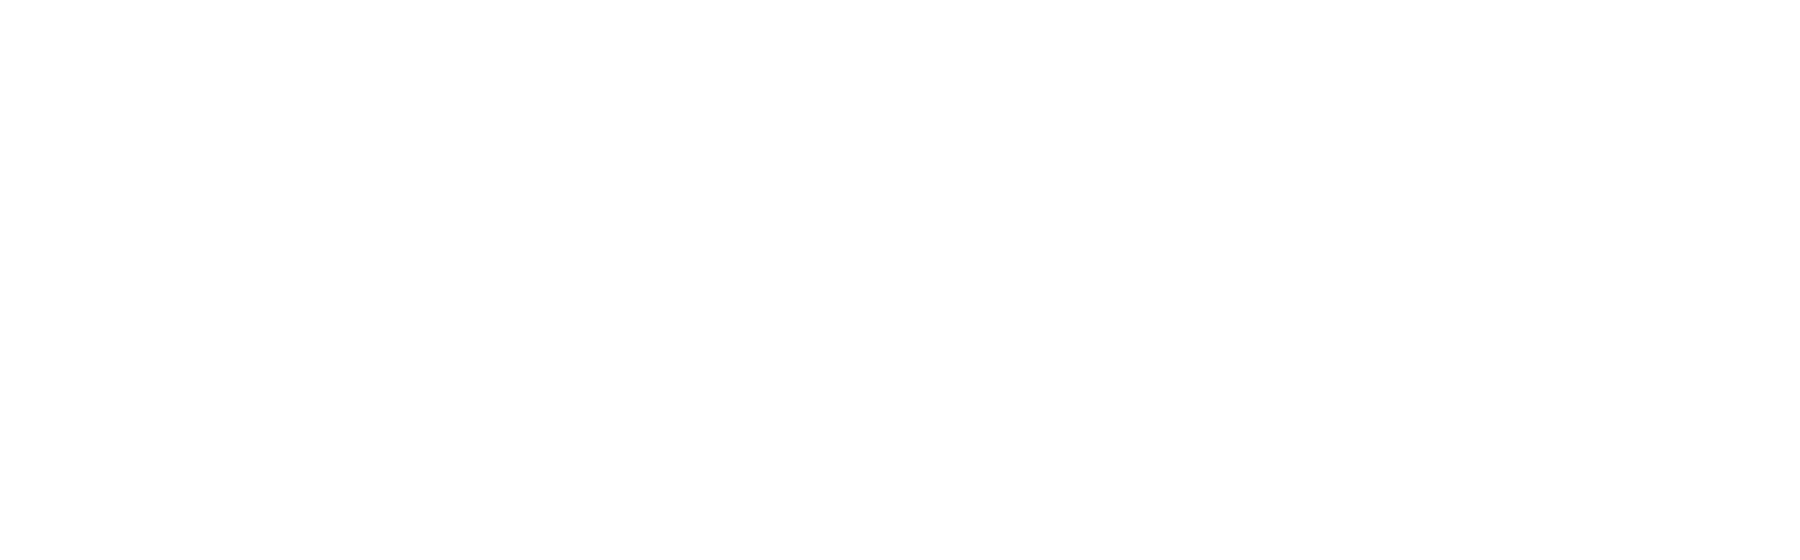 PARTICIPATE IN SMS 2024 SMS by GI 2024